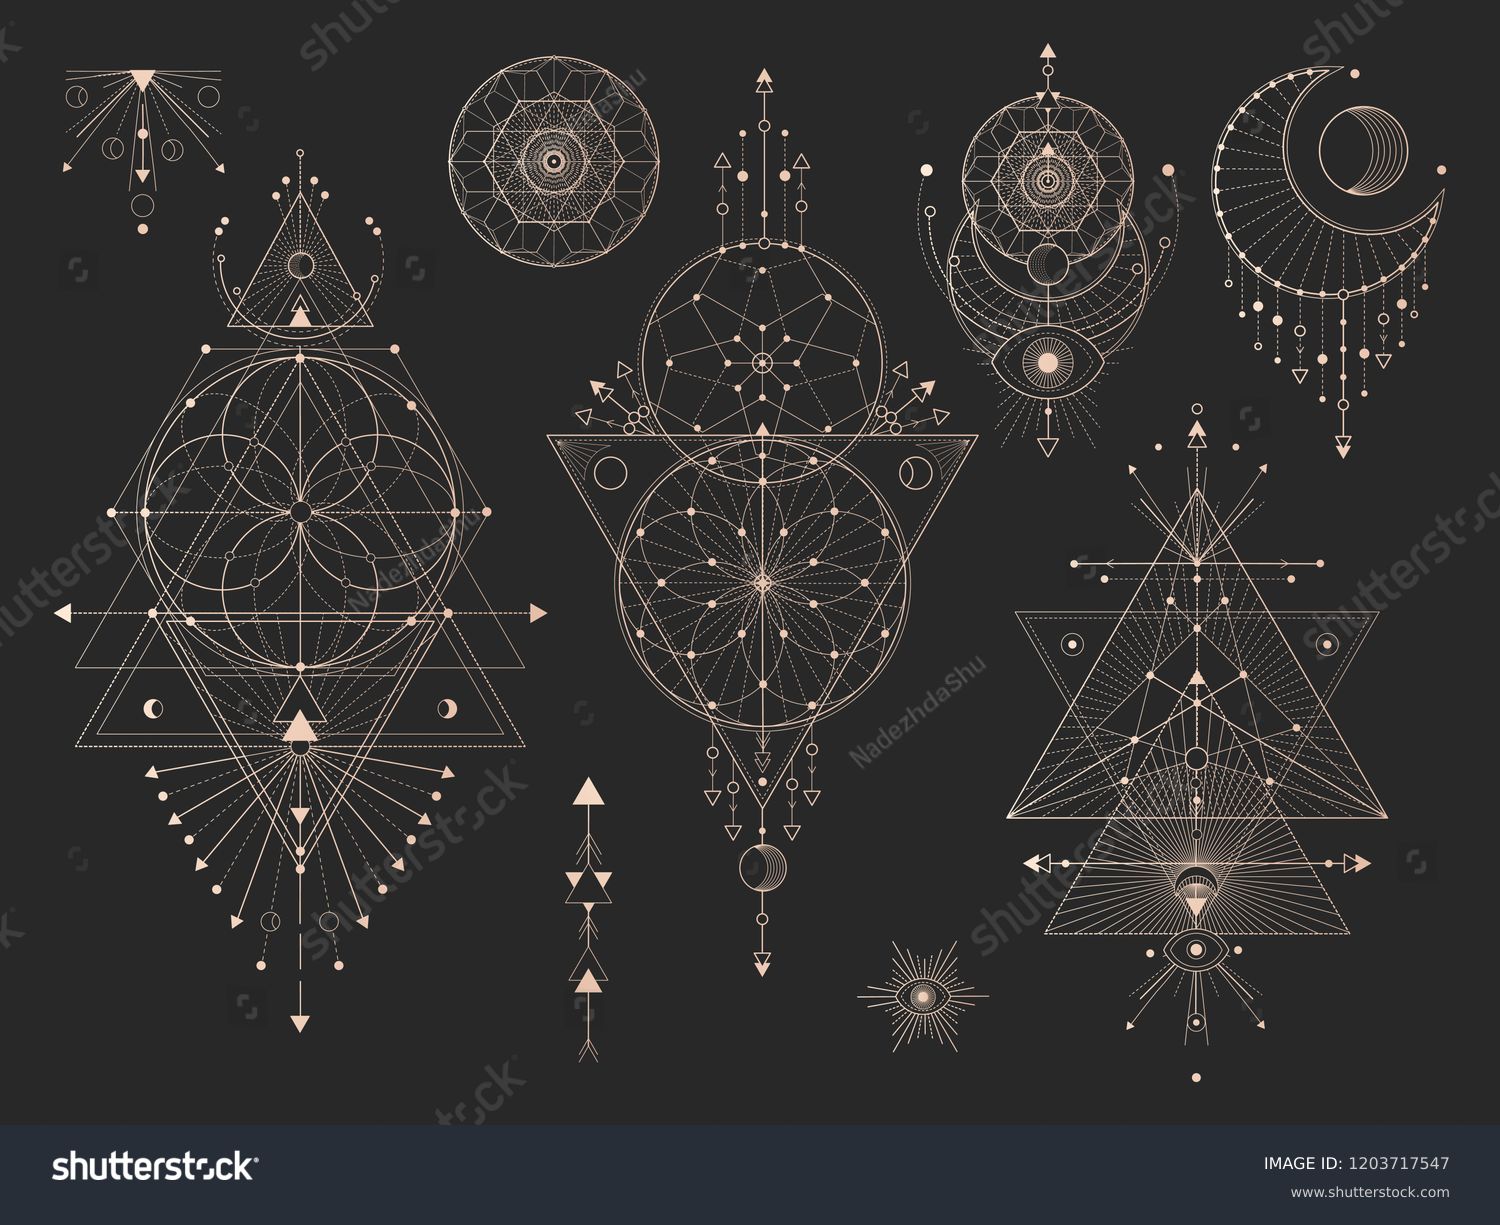 Vector set of Sacred geometric symbols with moon, eye, arrows, dreamcatcher and figures on black background. Gold abstract mystic signs collection drawn in lines. For you design. #1203717547